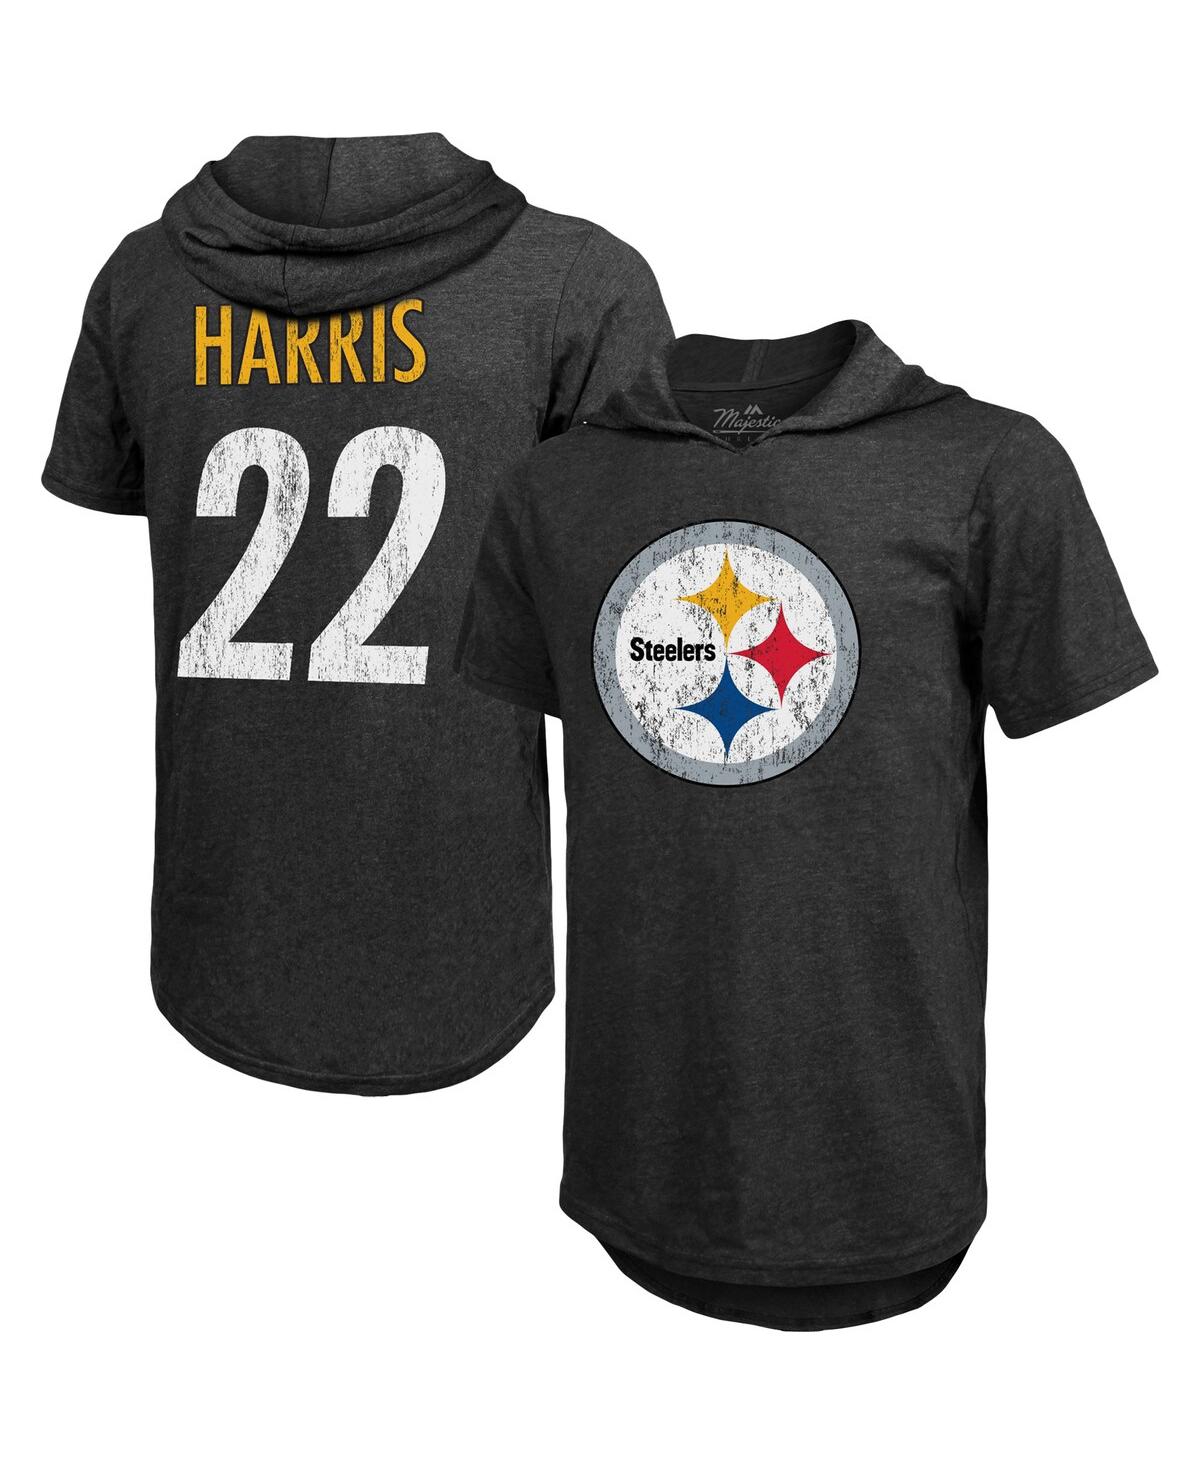 Men's Majestic Threads Najee Harris Black Pittsburgh Steelers Player Name and Number Tri-Blend Hoodie T-shirt - Black